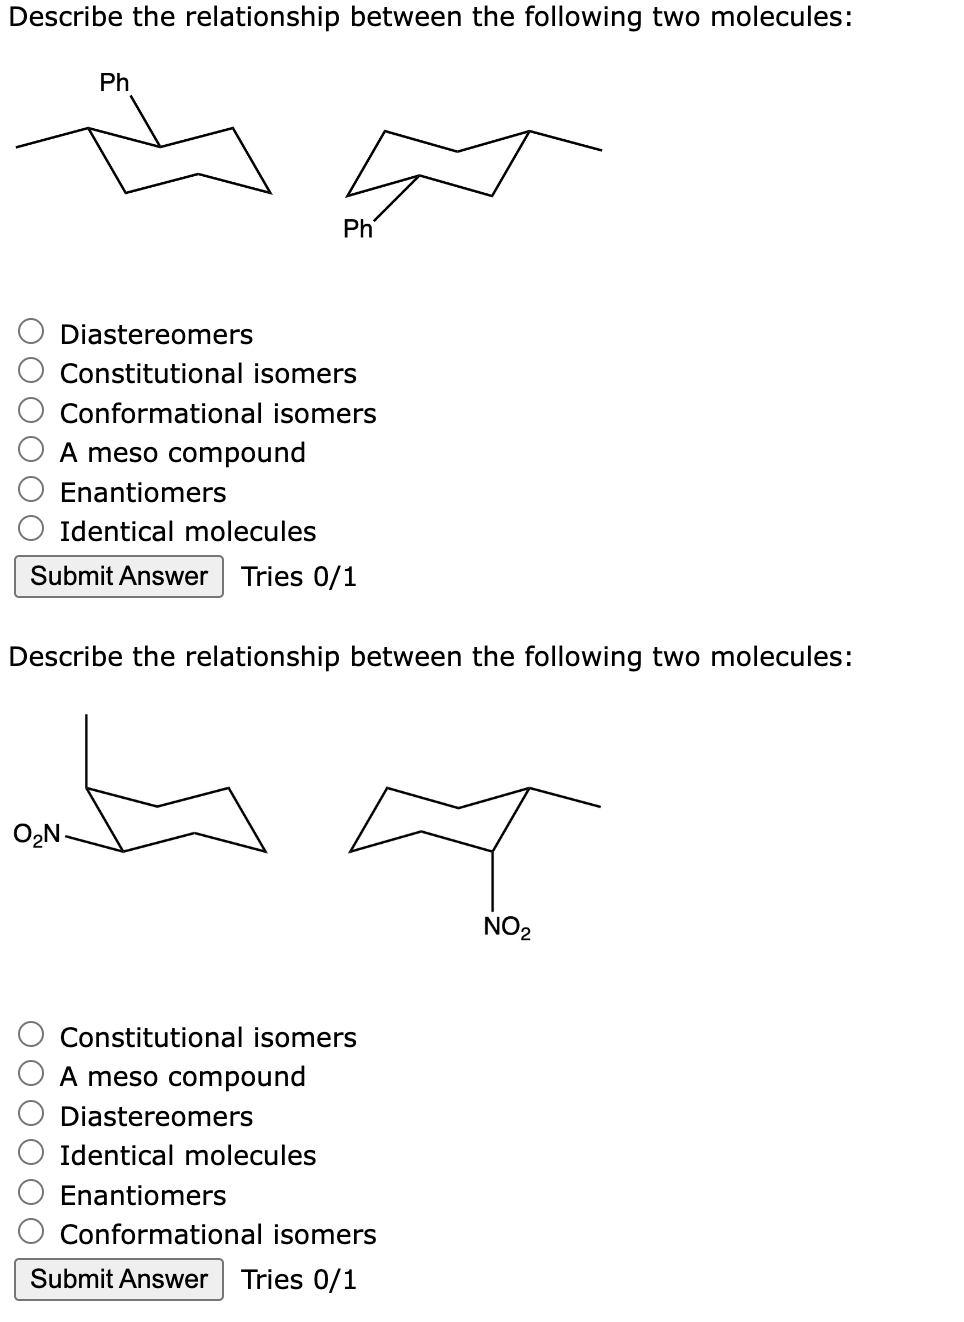 Describe the relationship between the following two molecules:
Ph
Ph
Diastereomers
Constitutional isomers
Conformational isomers
A meso compound
Enantiomers
Identical molecules
Submit Answer Tries 0/1
O₂N.
Describe the relationship between the following two molecules:
A
NO₂
Constitutional isomers
A meso compound
Diastereomers
Identical molecules
Enantiomers
Conformational isomers
Submit Answer Tries 0/1